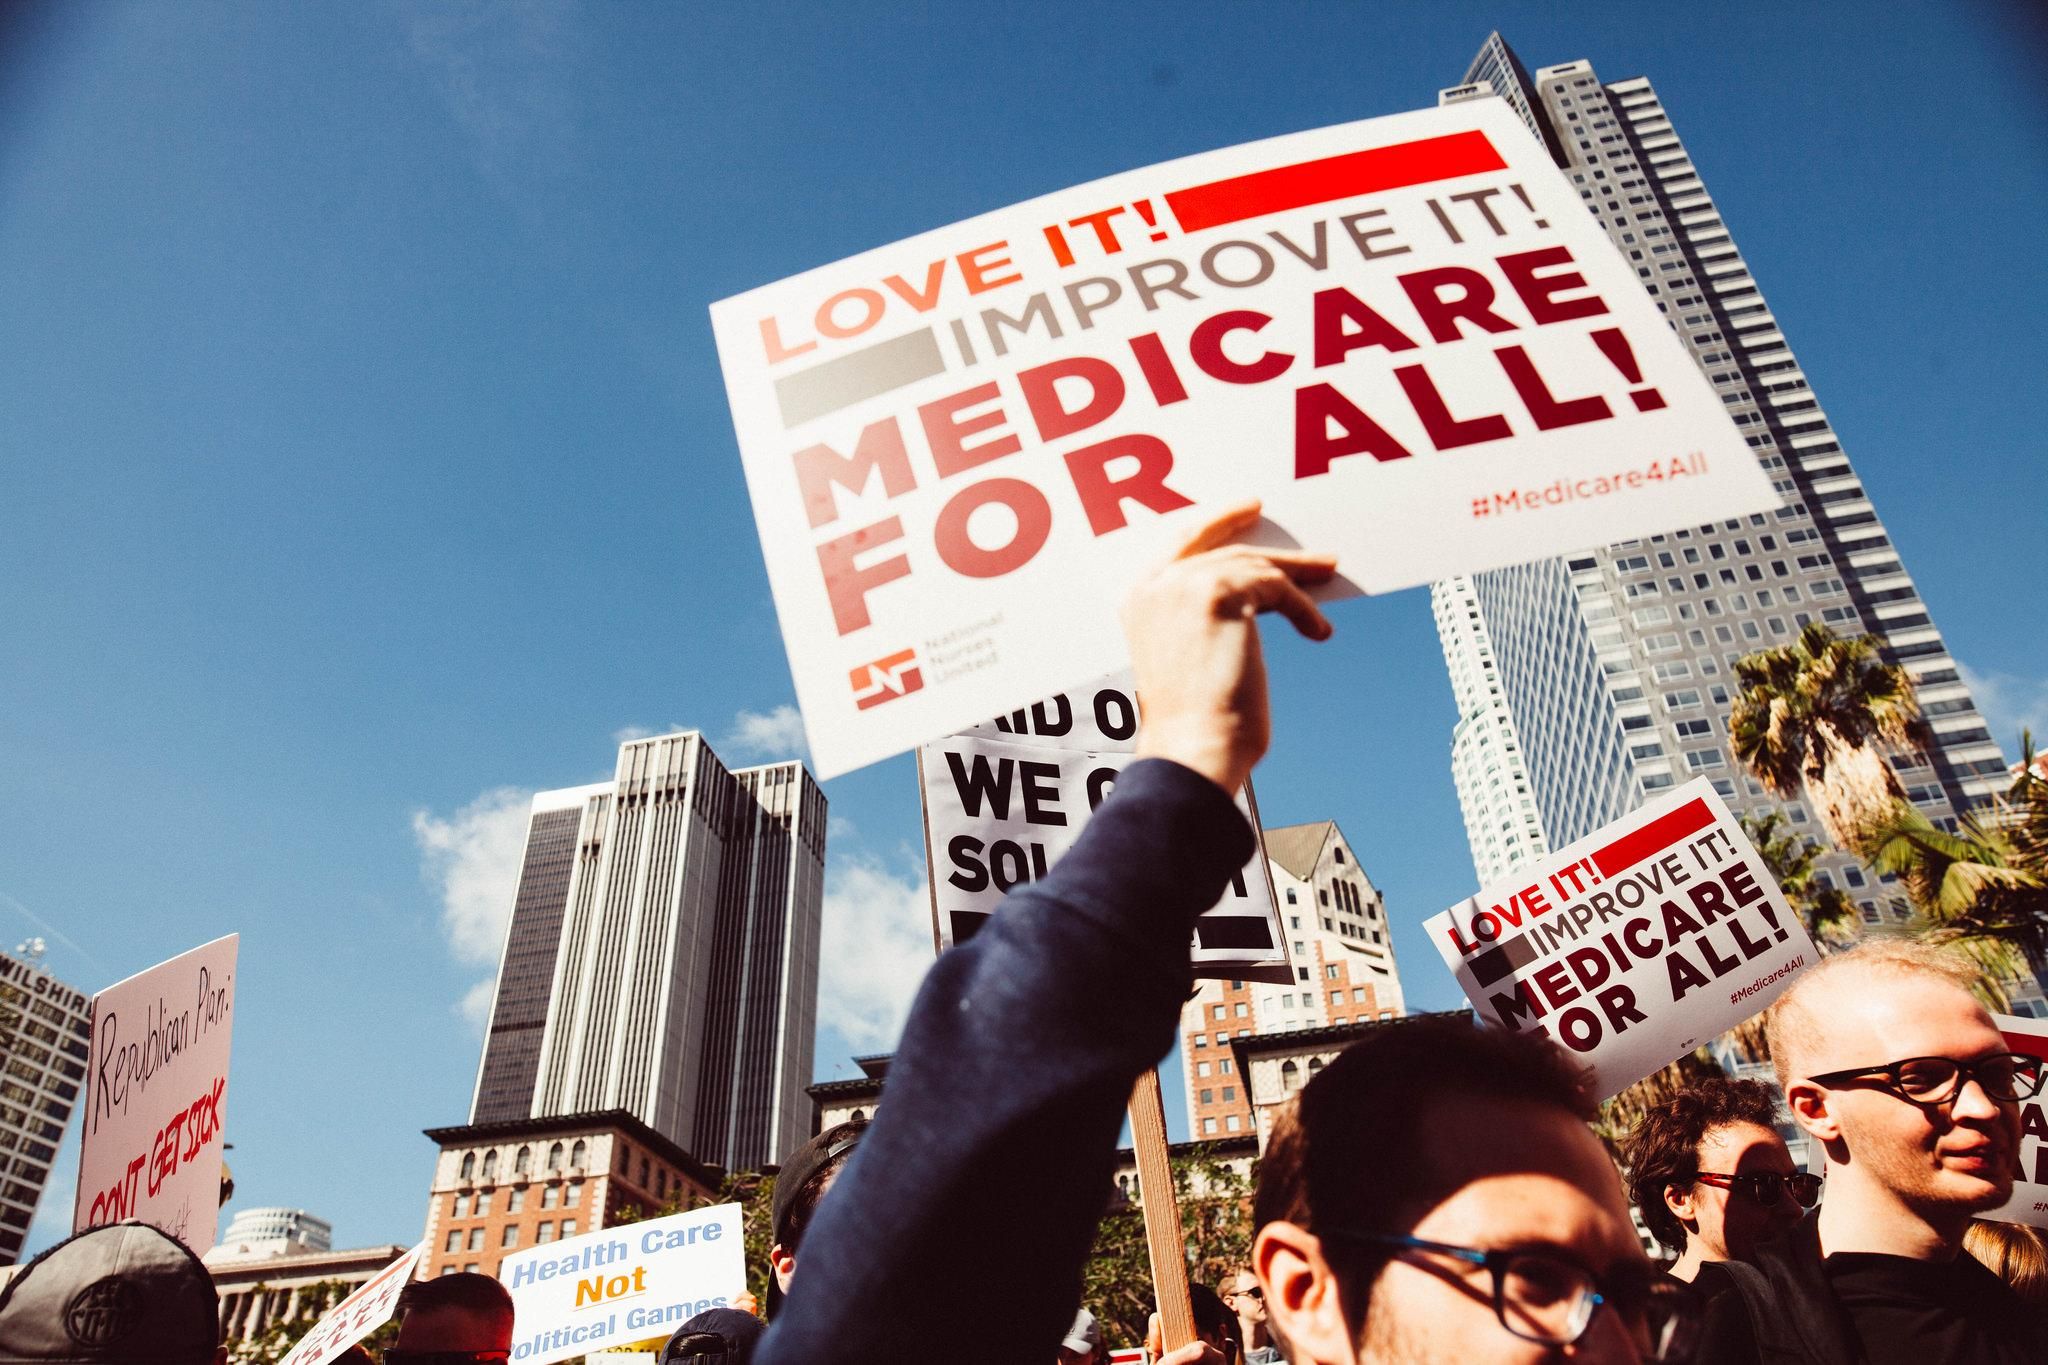 The Republican effort to repeal the Affordable Care Act over the summer energized the pro-Medicare for All movement.